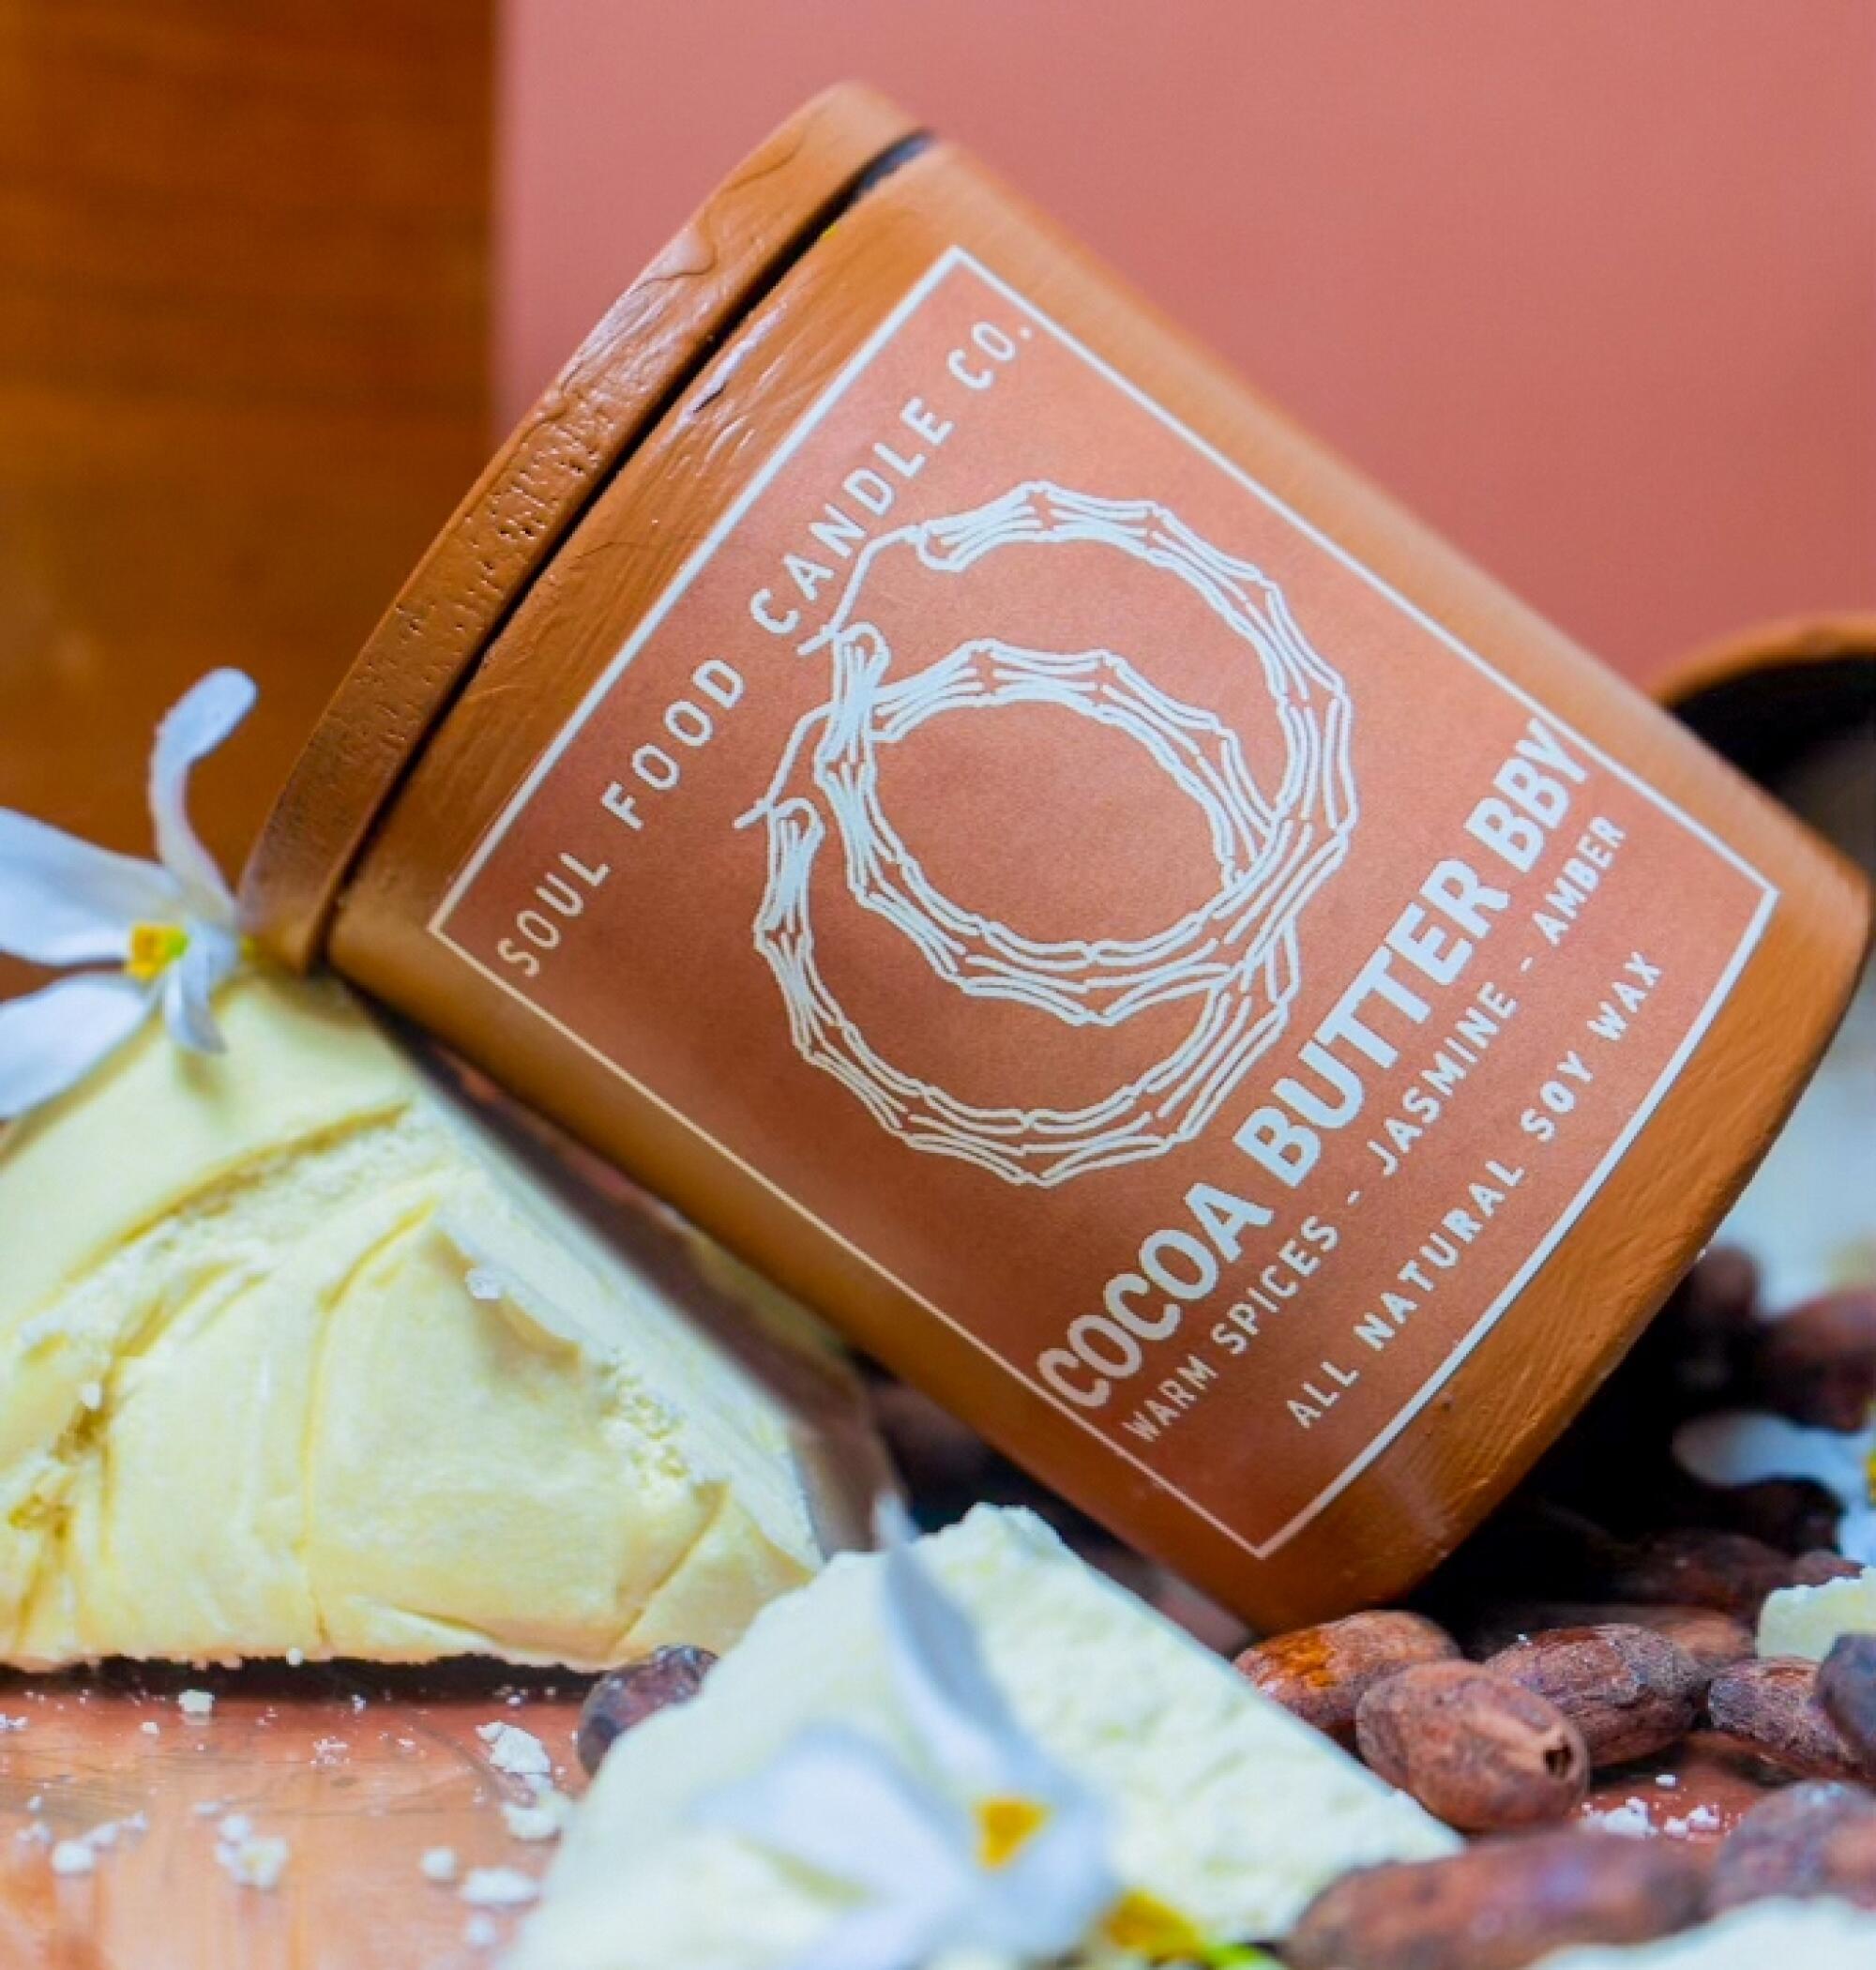 The Cocoa Butter BBY candle from Soul Food Candle Co.